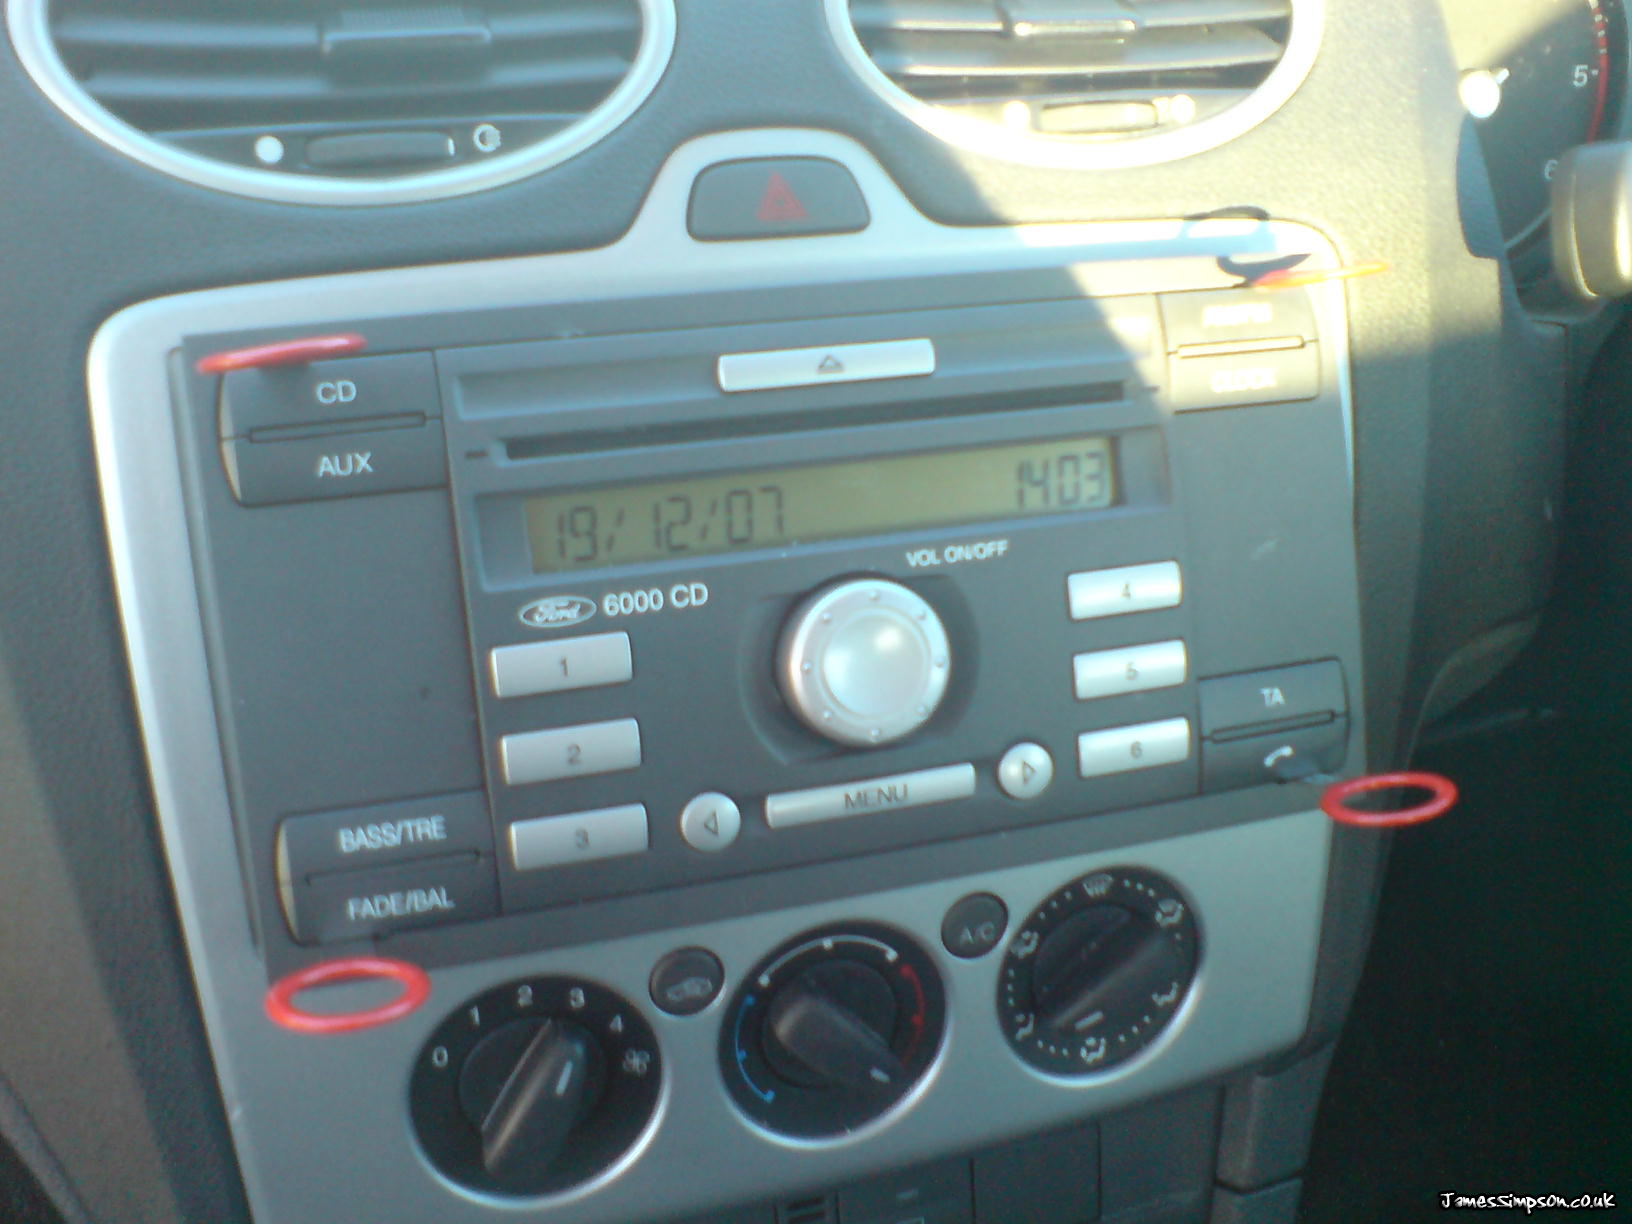 How to remove stuck cd from ford radio